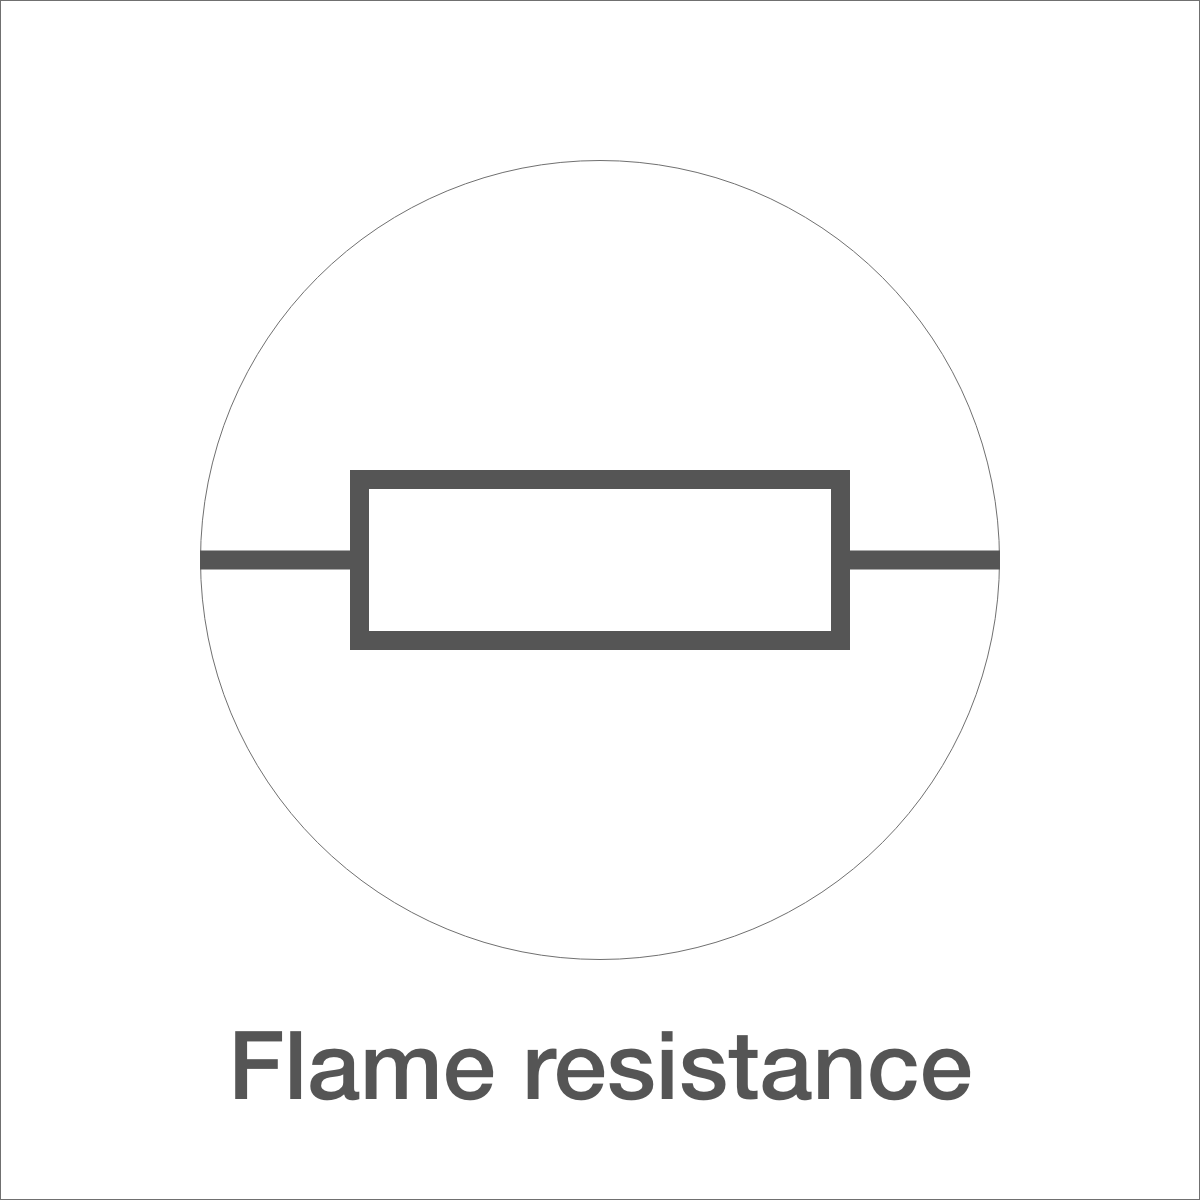 Flame resistance icon